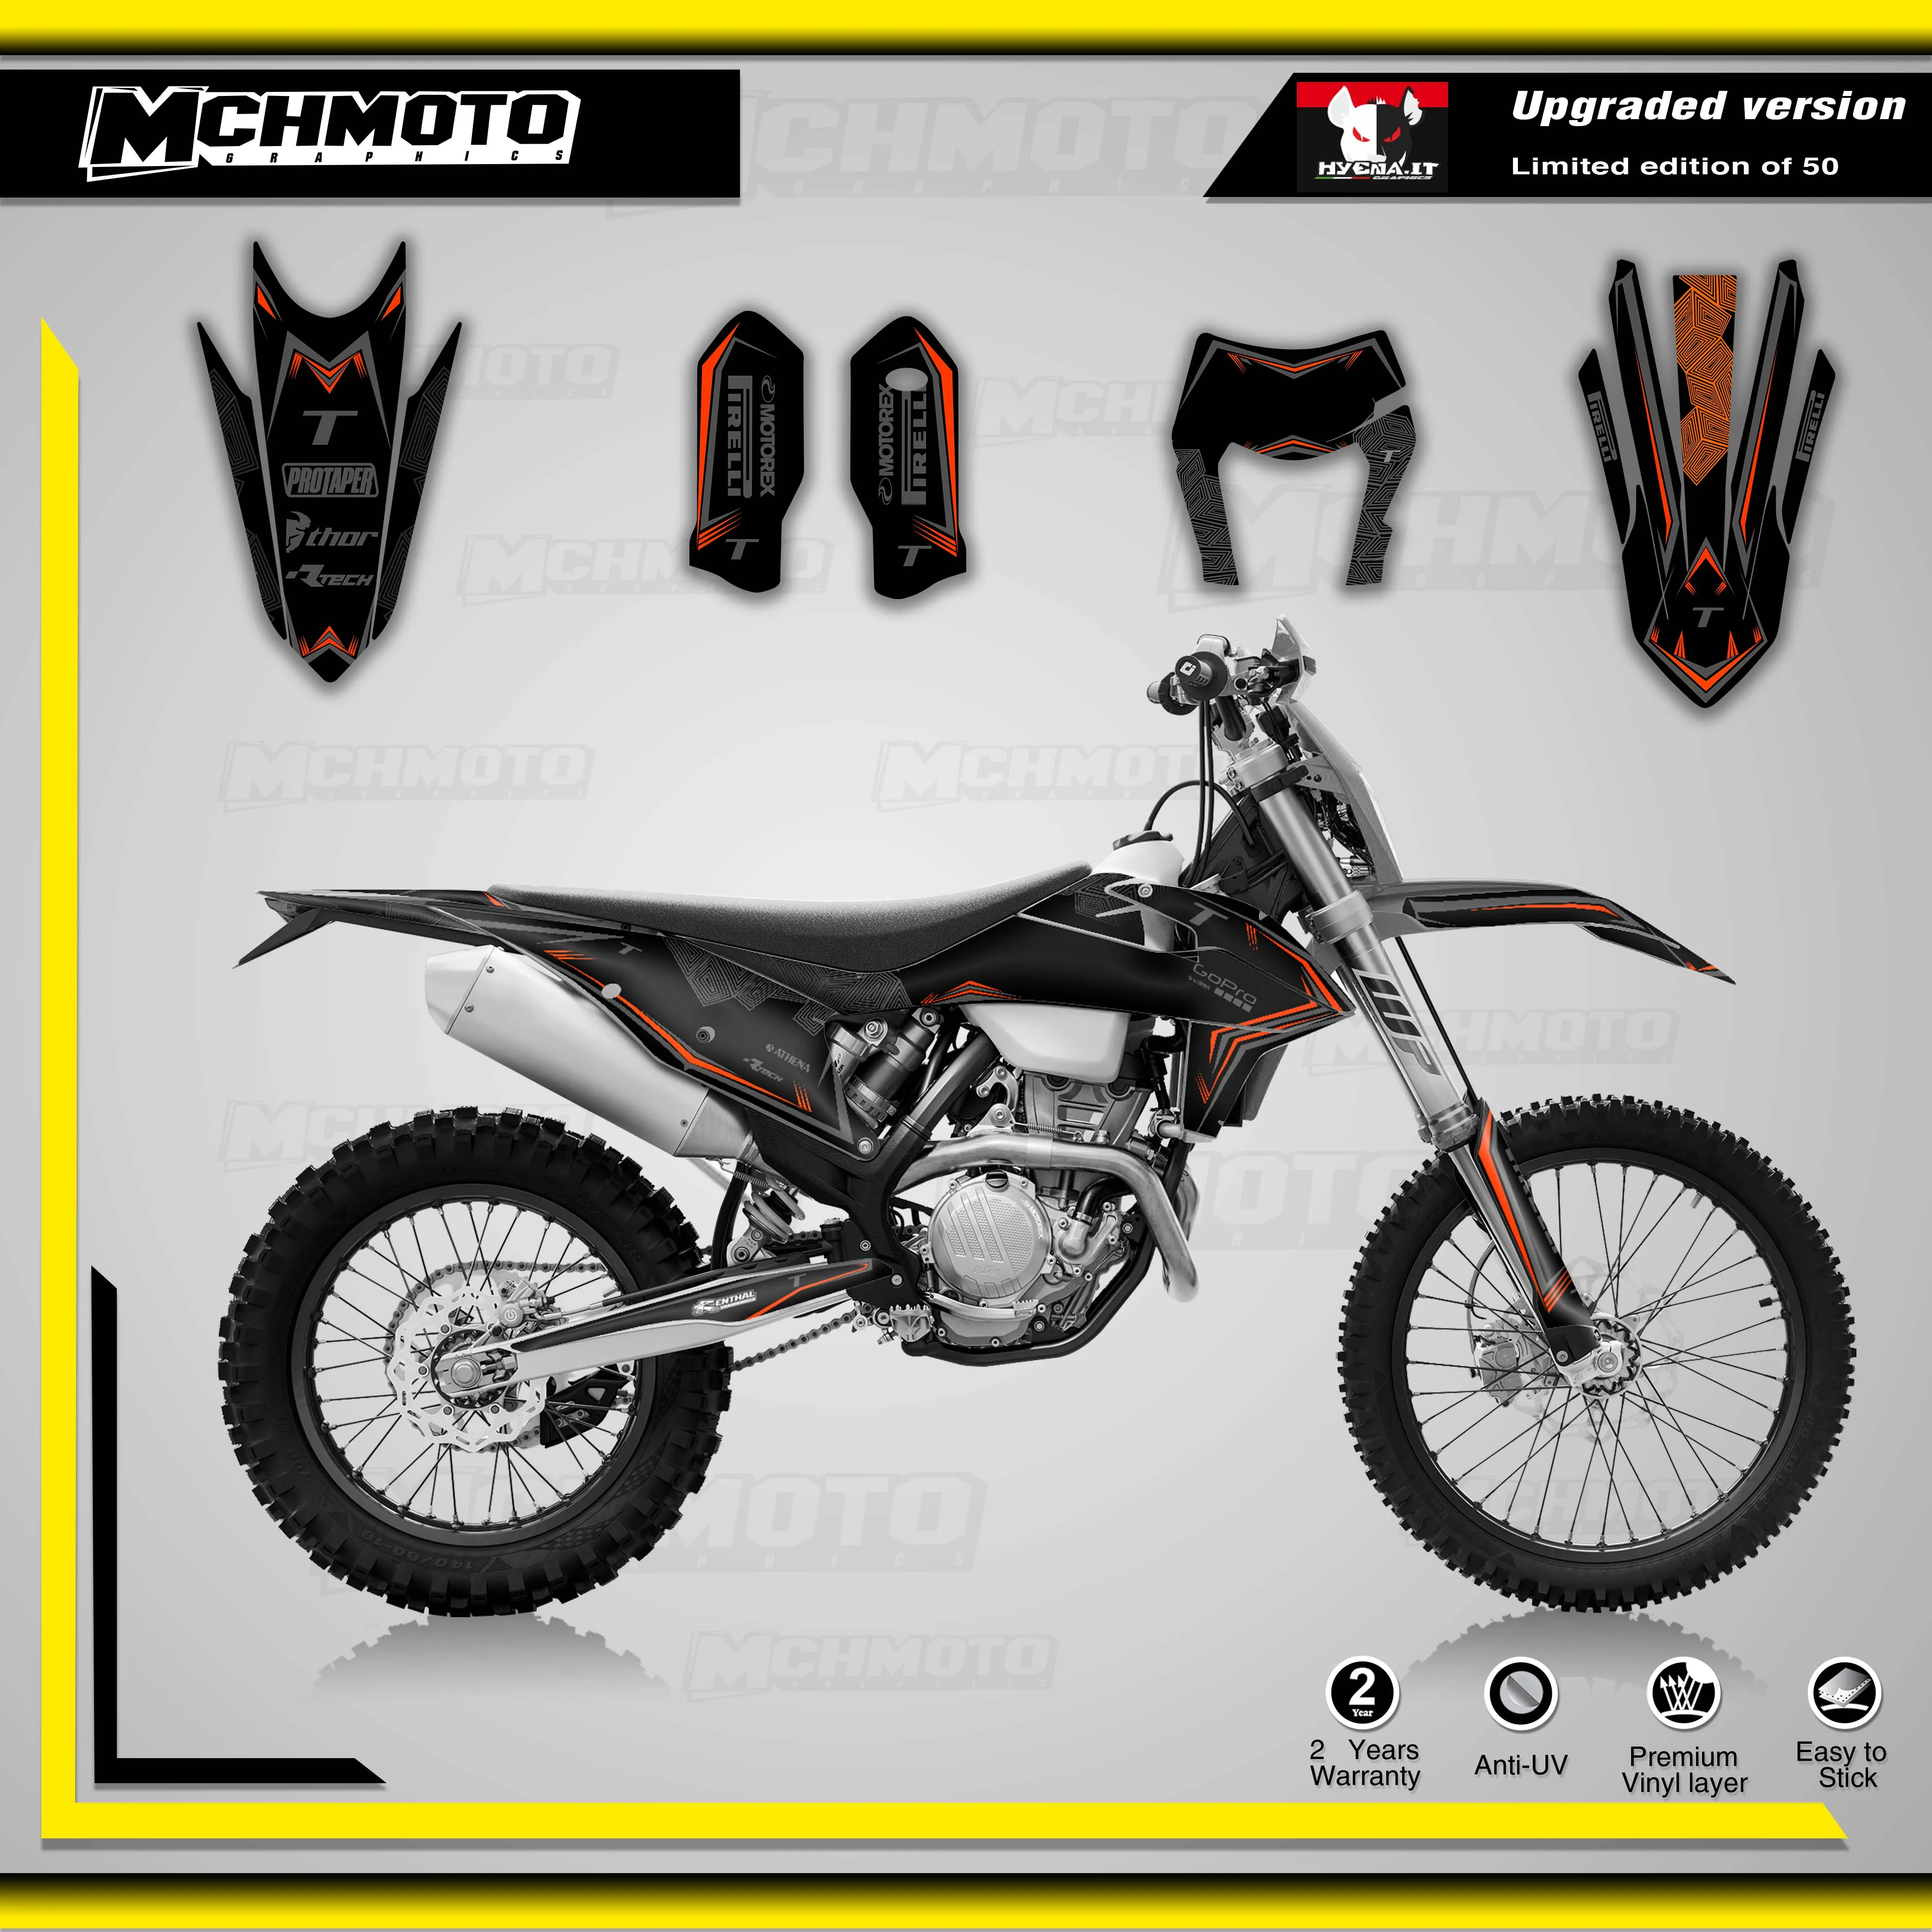 

MCHMFG Motorcycle Team Graphic Decals Stickers DECO Dekor For KTM EXC EXCF XC XCF 2020 2021 SX SXF 2019-2021 125 200 250 300 350